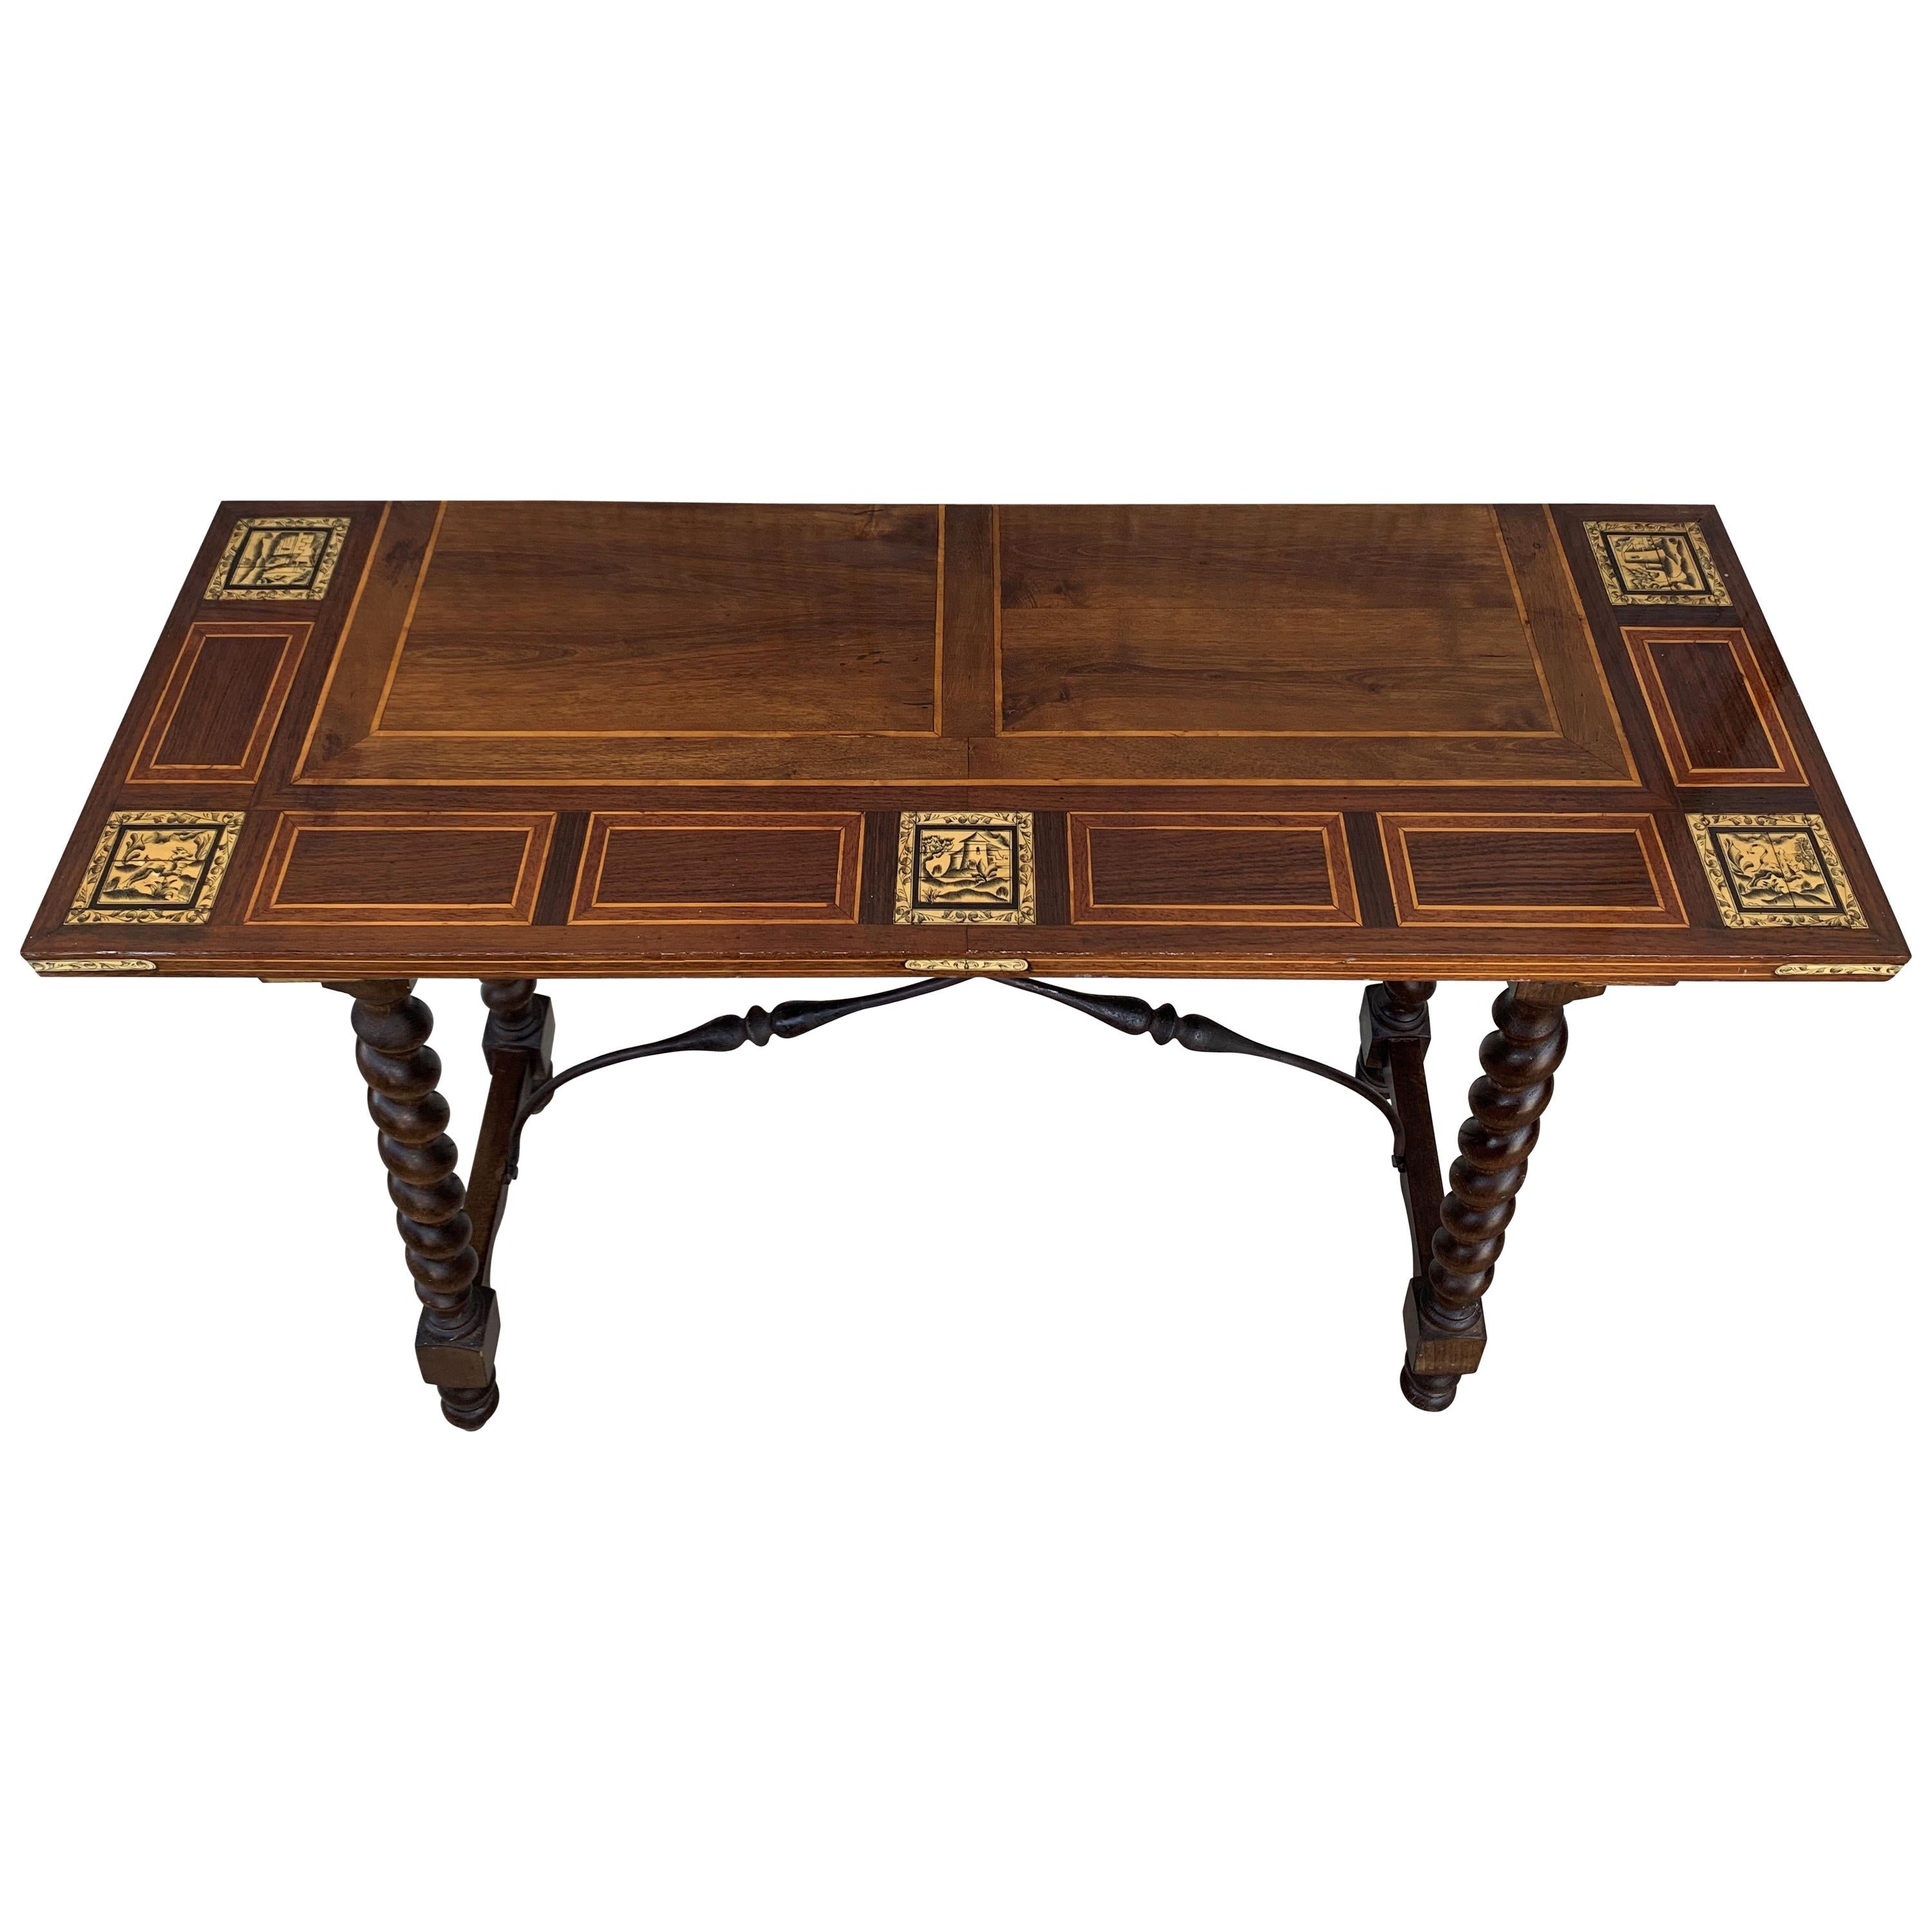 19th century Spanish salomonic Baroque side table with Marquetry top and iron stretchers
carved wooden table with smooth and rectangular upper board, which has two iron fasteners decorated with curves, and legs in turned wood, with salomonic shapes